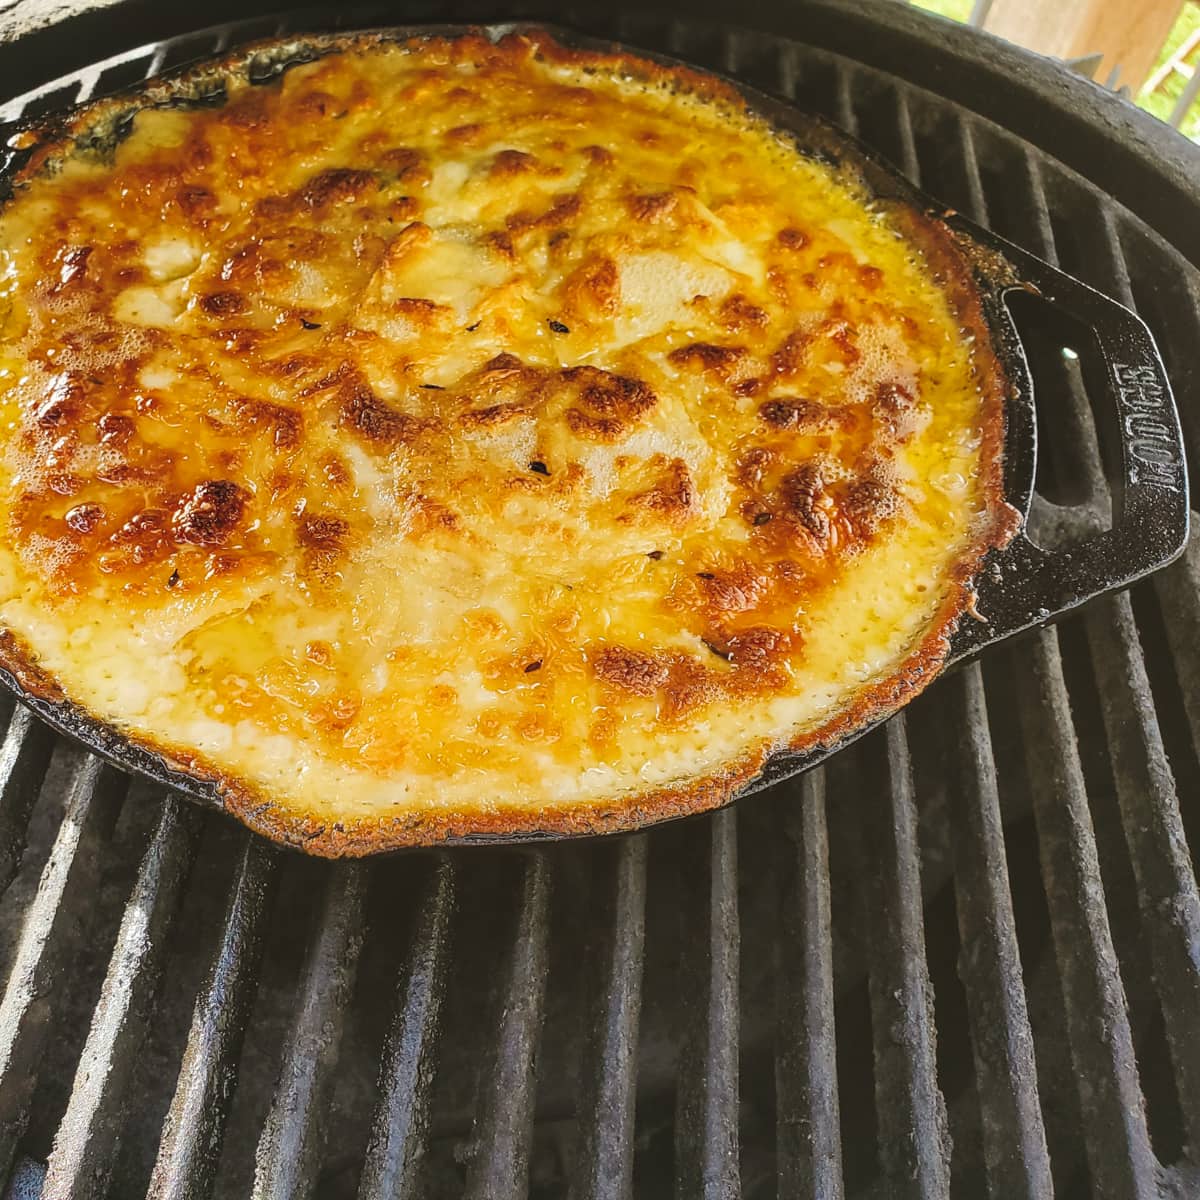 Smoked au gratin potatoes in a cast iron pan cooking on a Big Green Egg smoker.